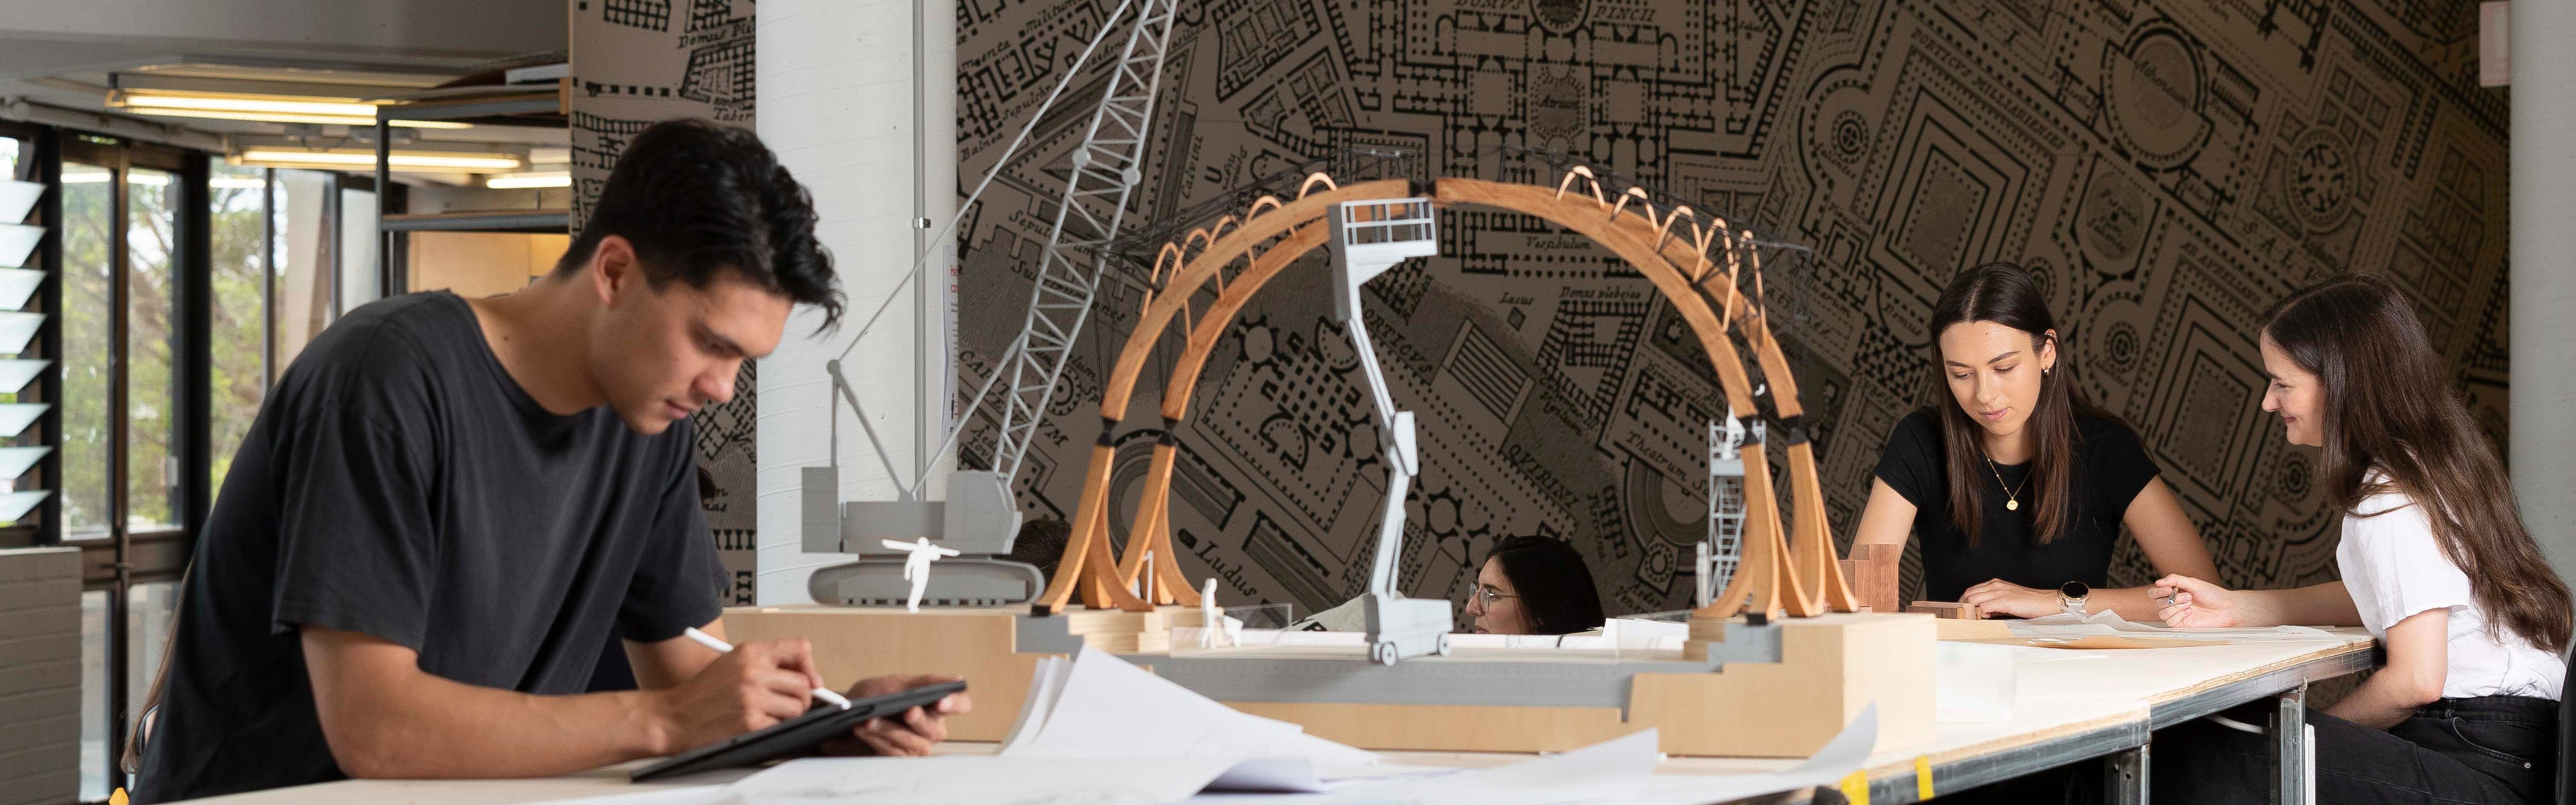 Undergraduate courses - The University of Sydney School of Architecture,  Design and Planning